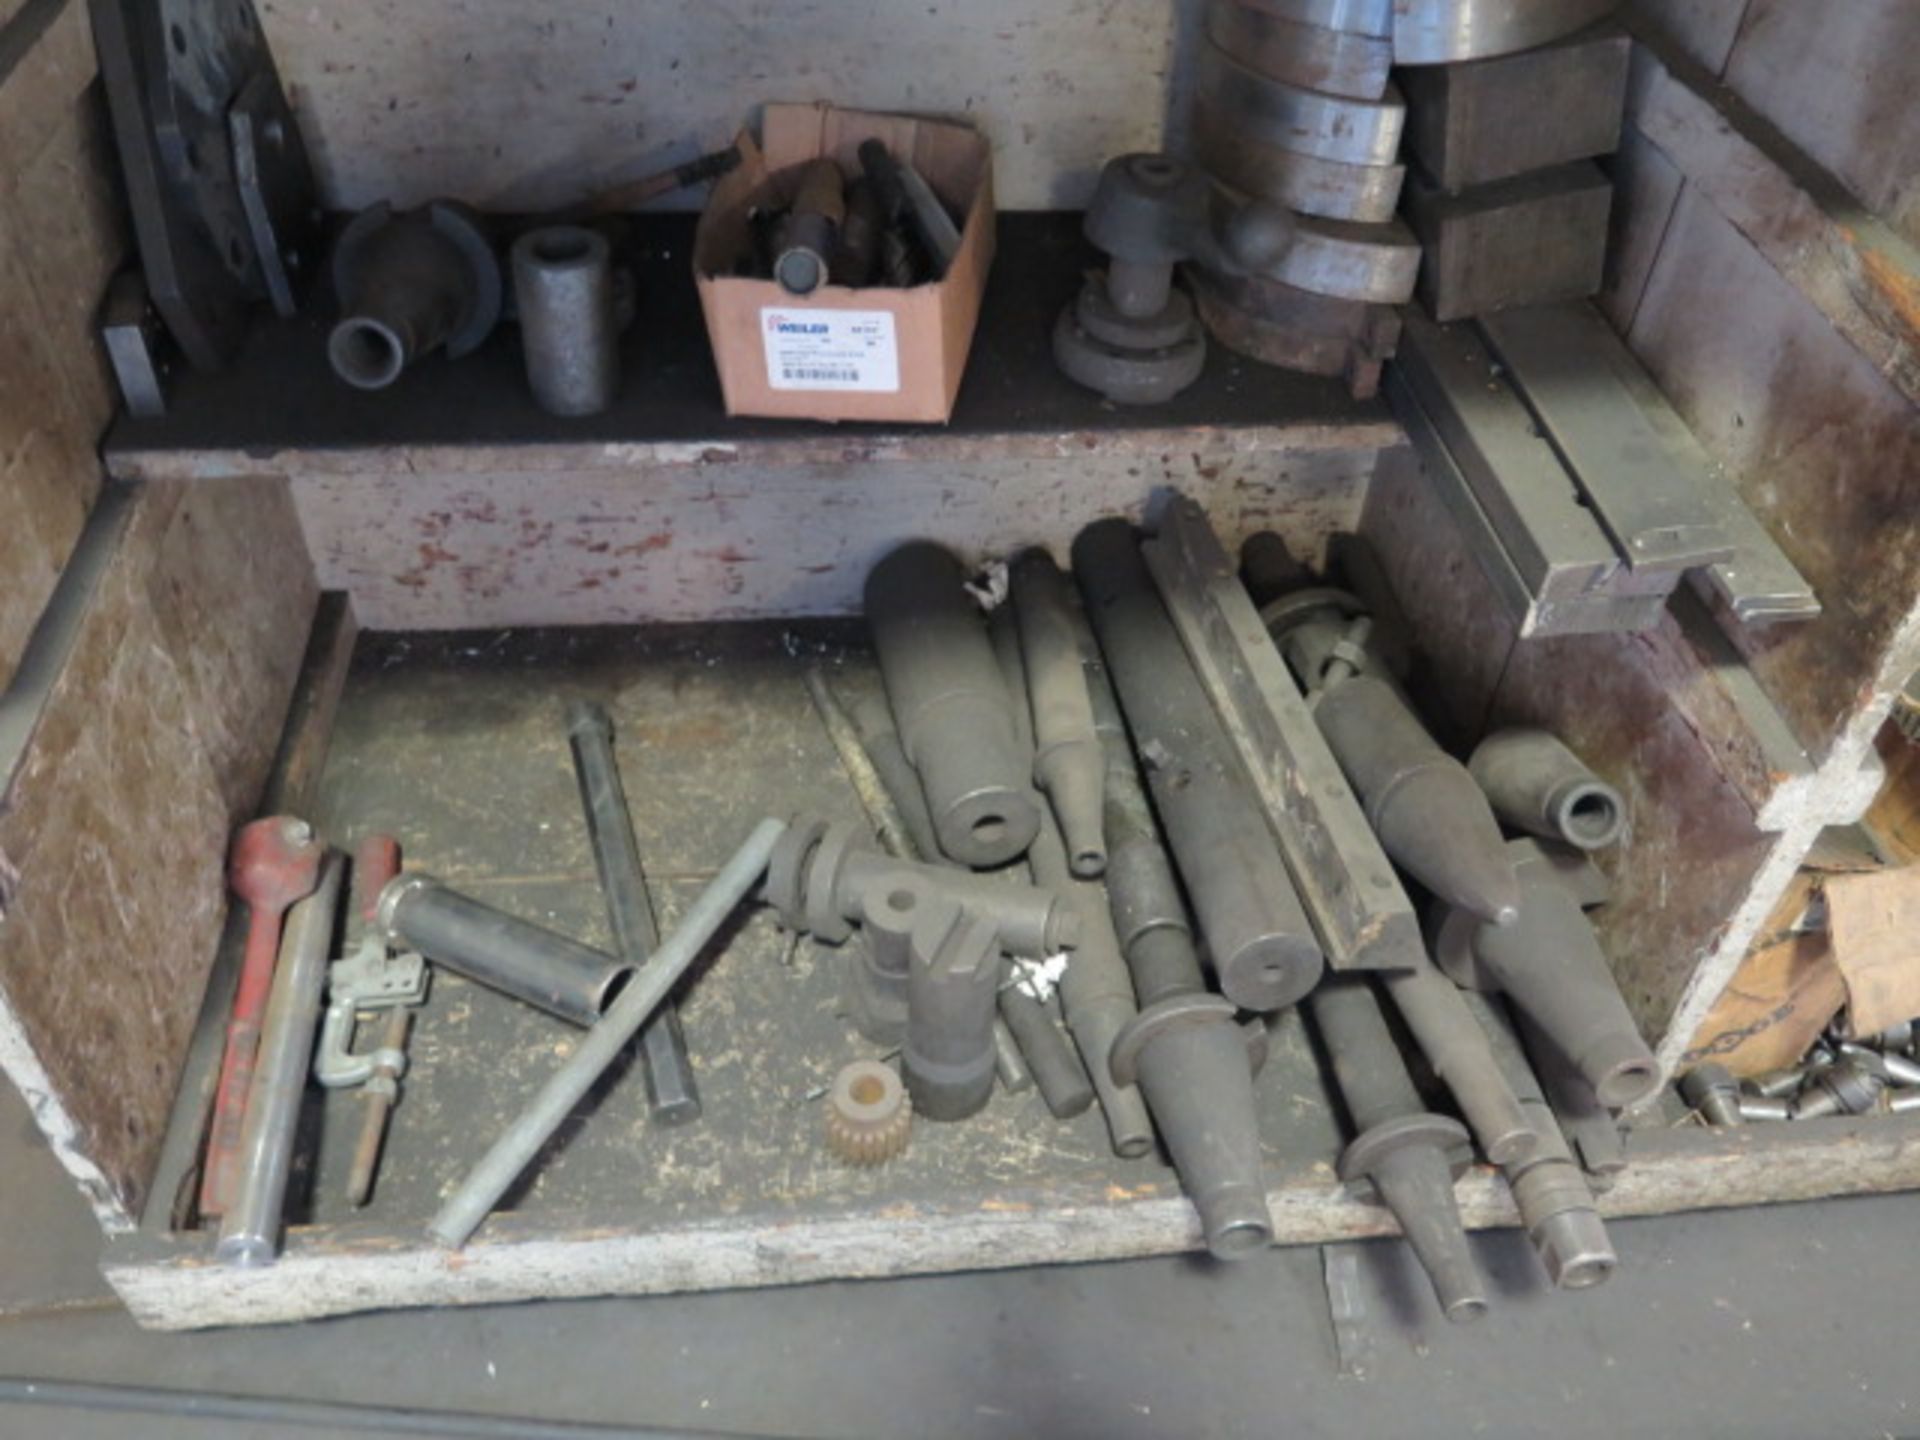 40-Taper and 50-Taper Arbors, Misc Taper Tooling, Broaches and Guides, Endmills and Mill Clamps w/ - Image 8 of 11